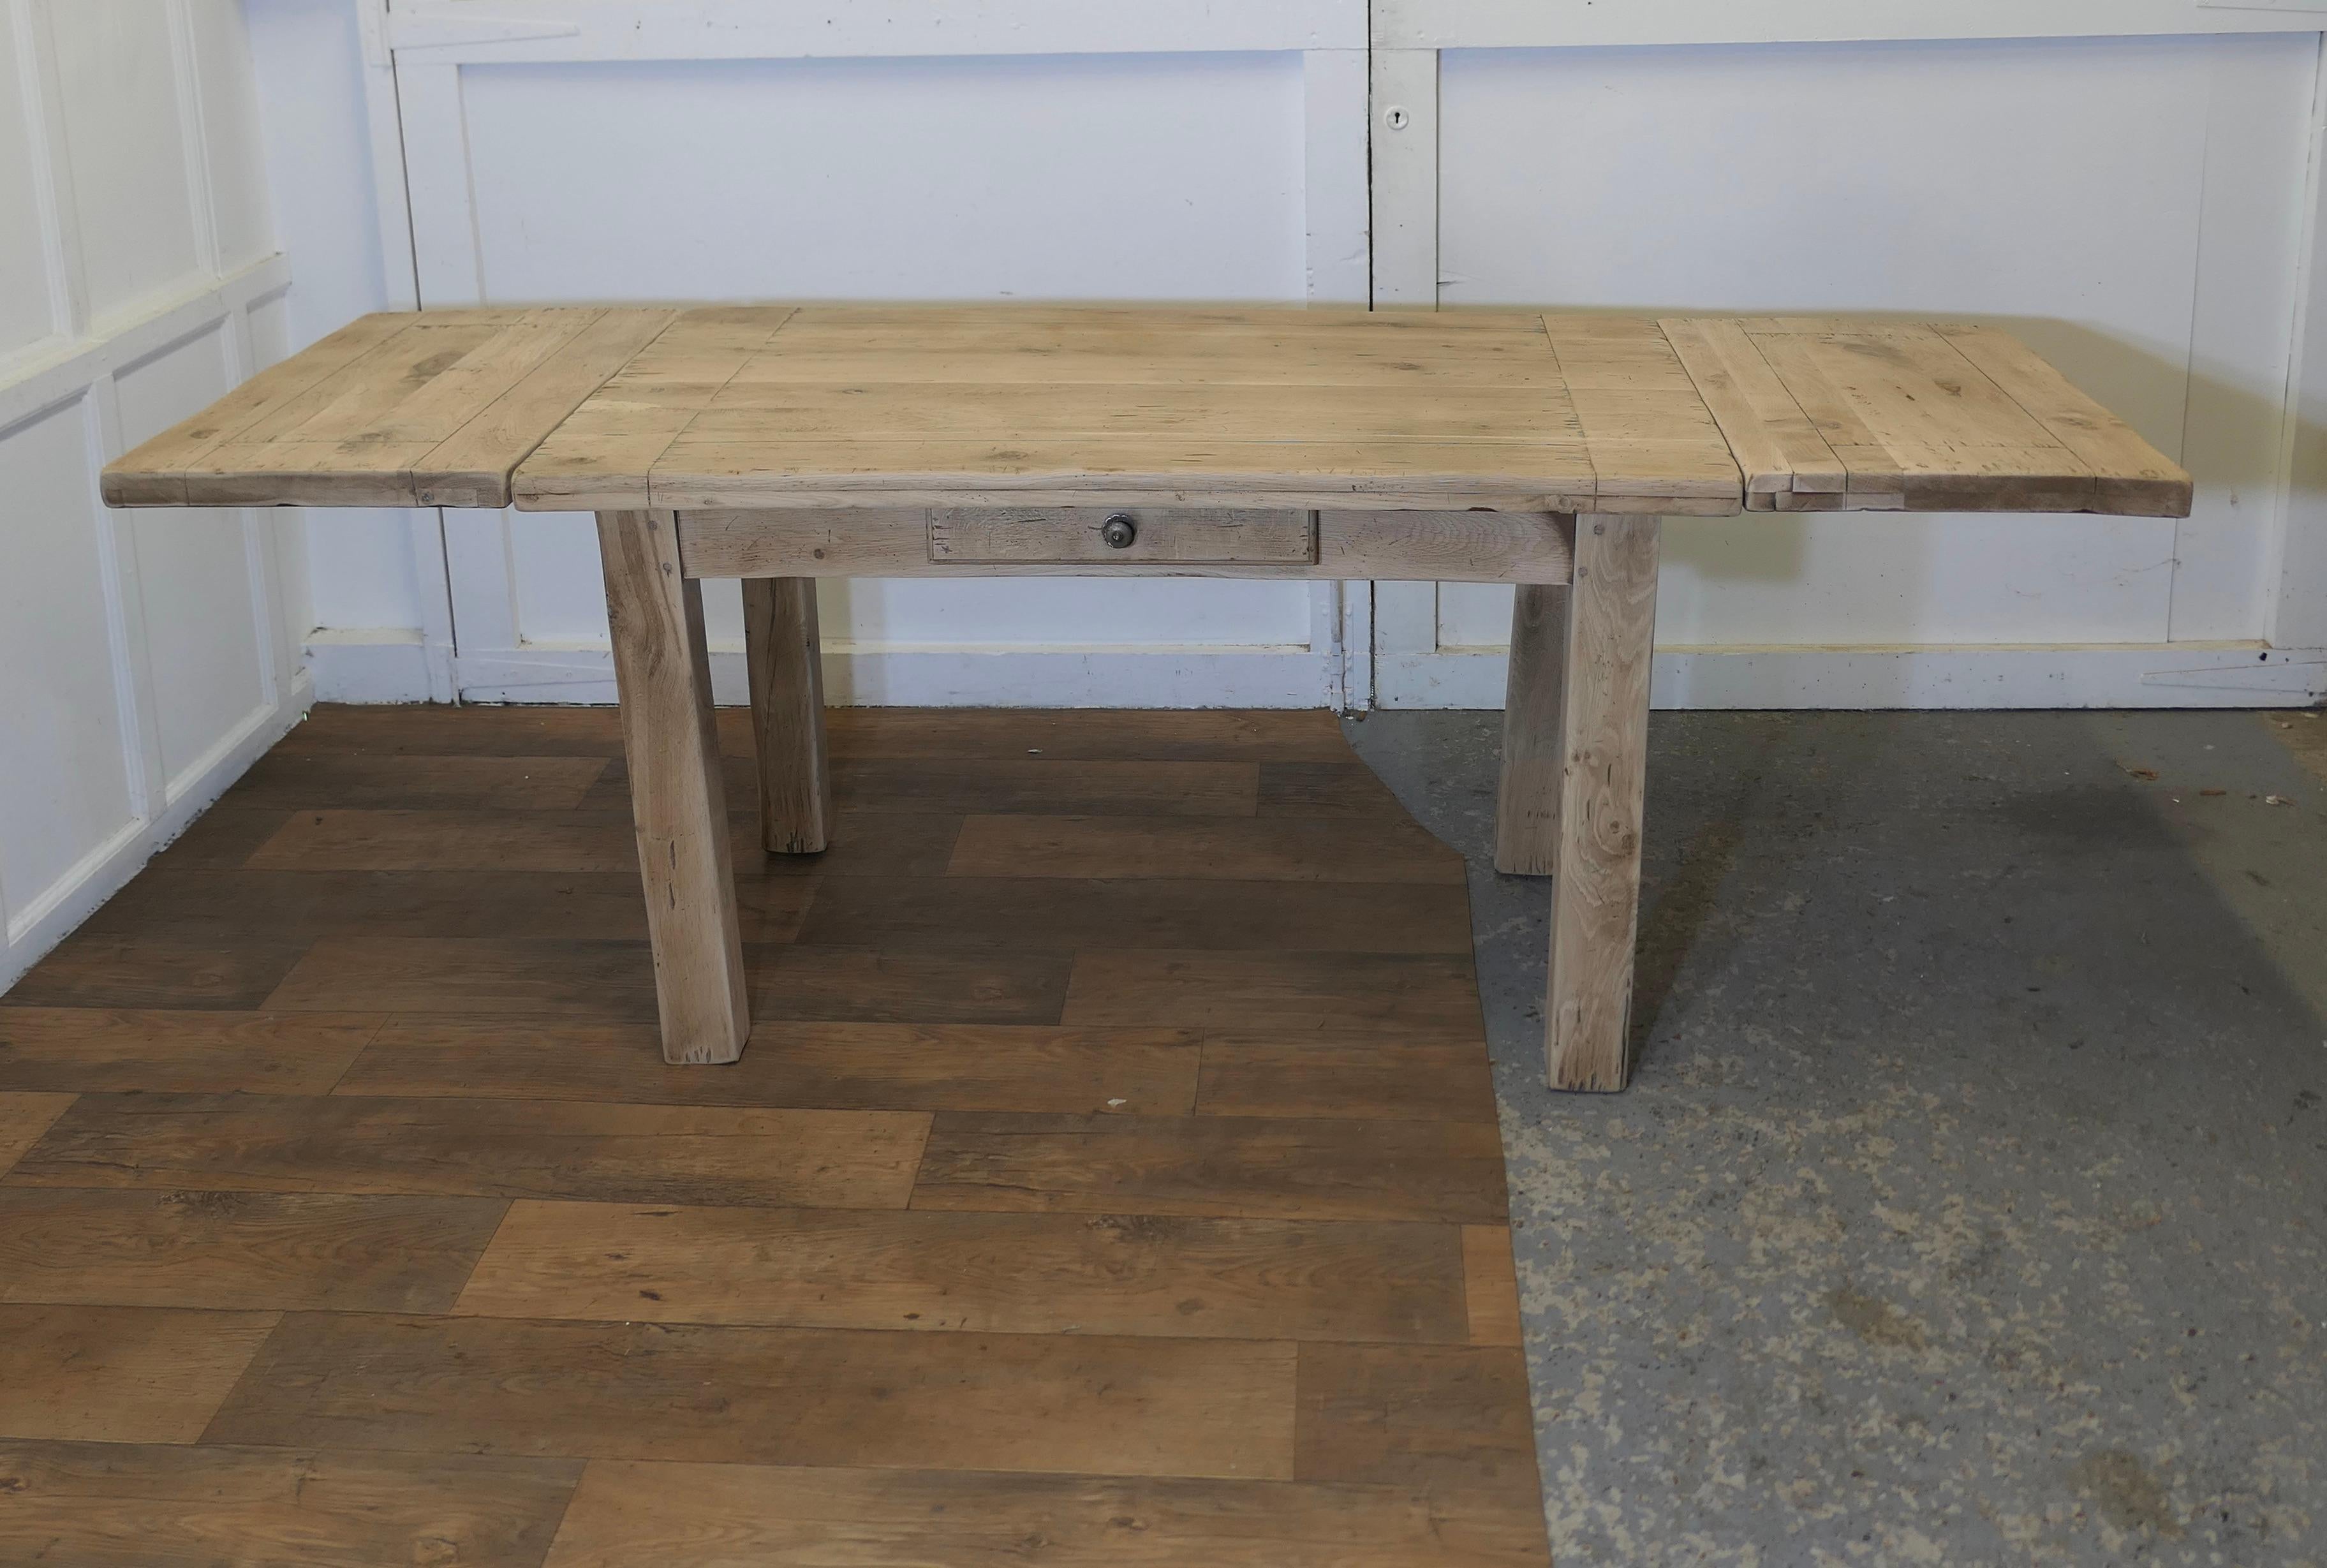 Sun Bleached Oak 7ft Extending Dining Table

The table has a very heavy solid top and it is extended by adding a pair of leaves, one at each end 
The Table is heavy quality thick oak which has been bleached giving it a great look
The table is in